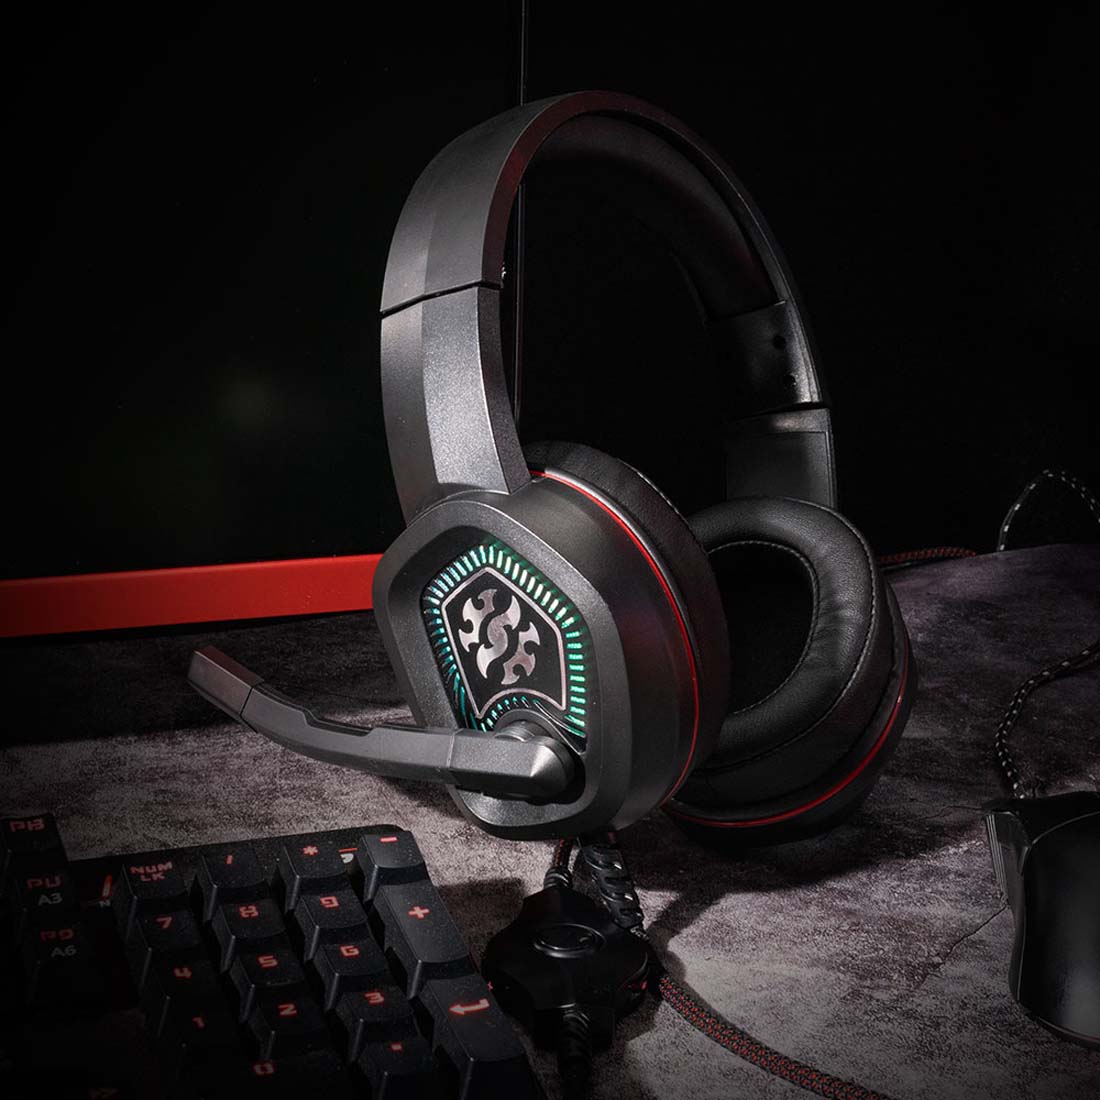 XPG EMIX H20 Gaming Over-Ear RGB Wired Headphone with Virtual 7.1 Surround Sound